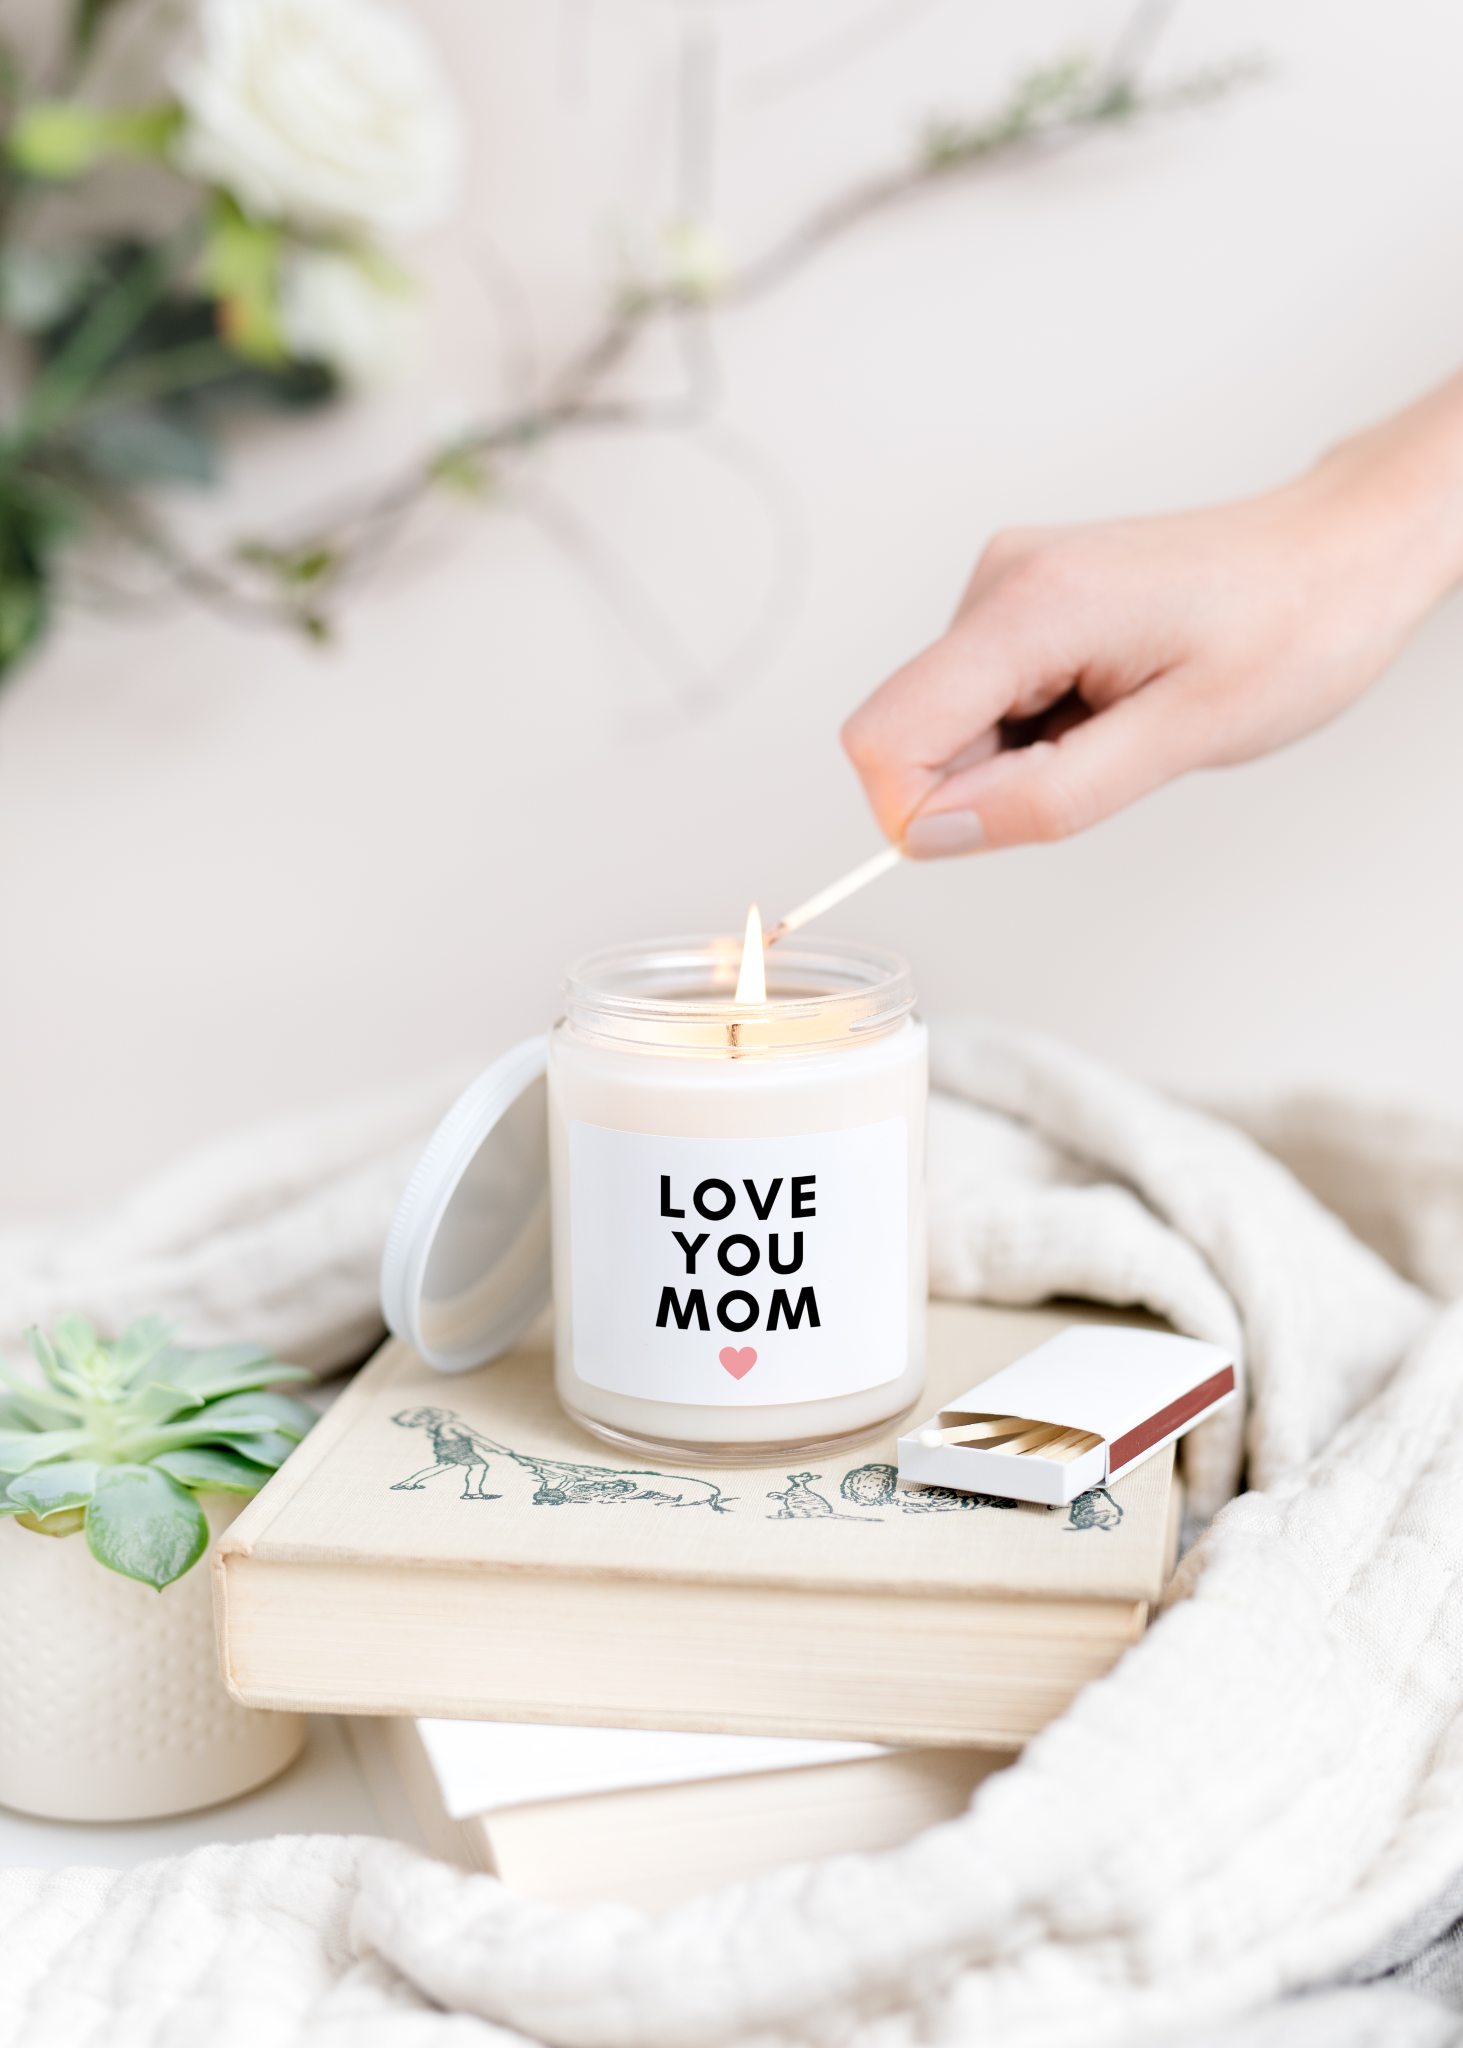 Love You Mom Candle in jar with white lid leaning against its side is being lit on top of a stack of books against a white background.